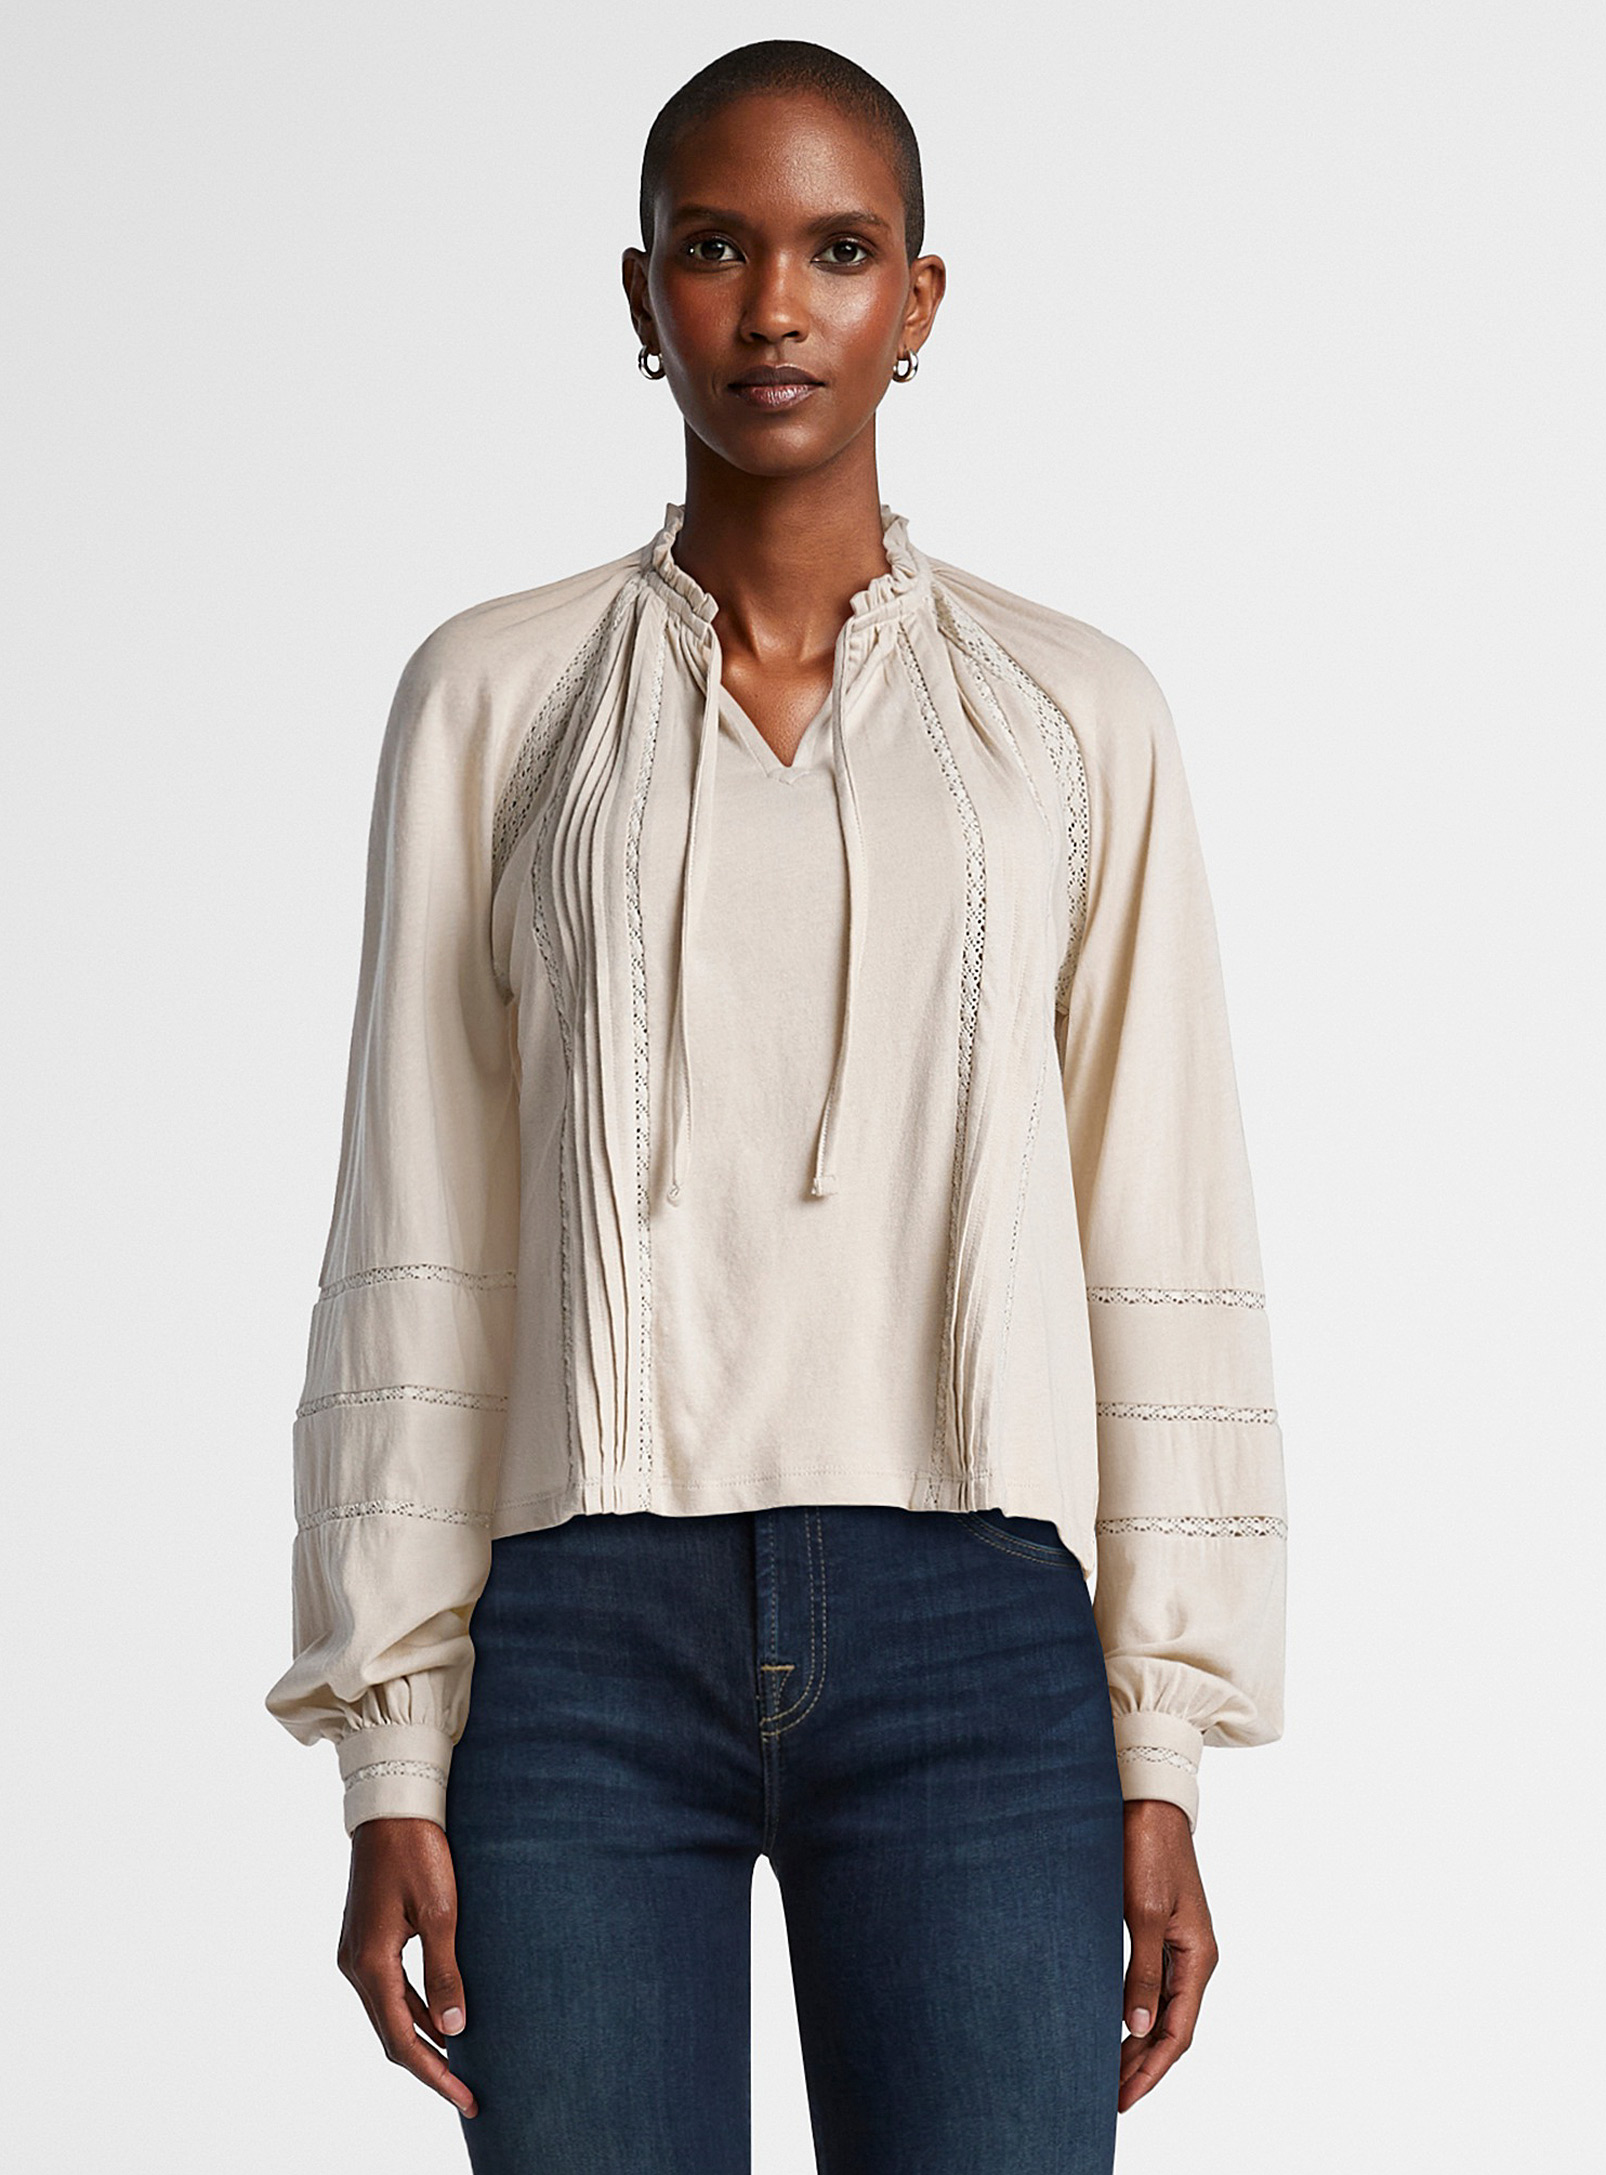 Contemporaine Crocheted Ribbons And Ruffled Collar Blouse In Neutral